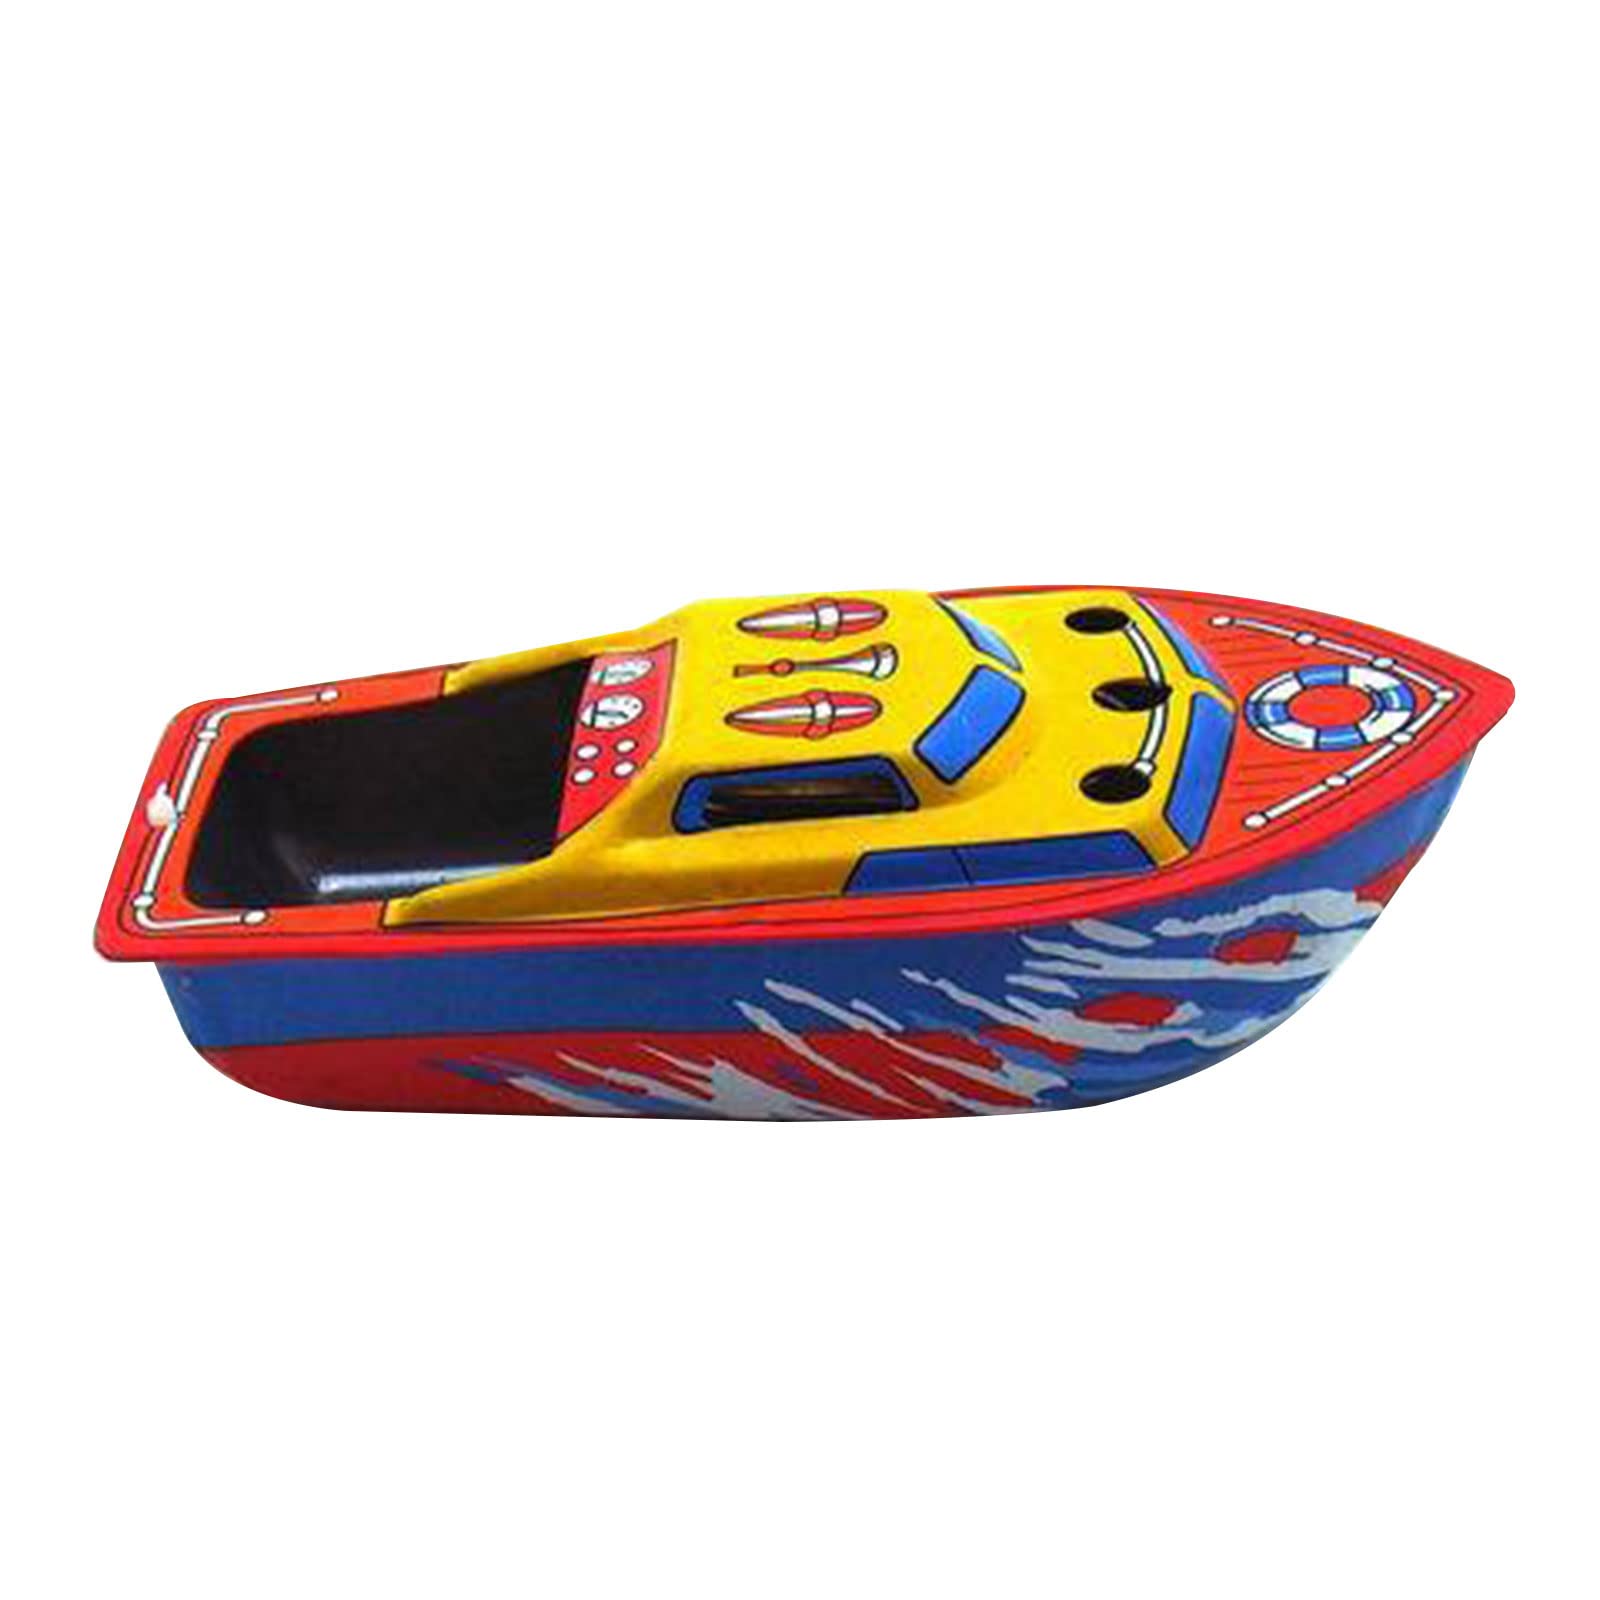 ljhnba Boat Candle Collectable Tin Toy Powered Ship Tin Vehicle Toy for Physics Gadget Student Learning Science Gadget